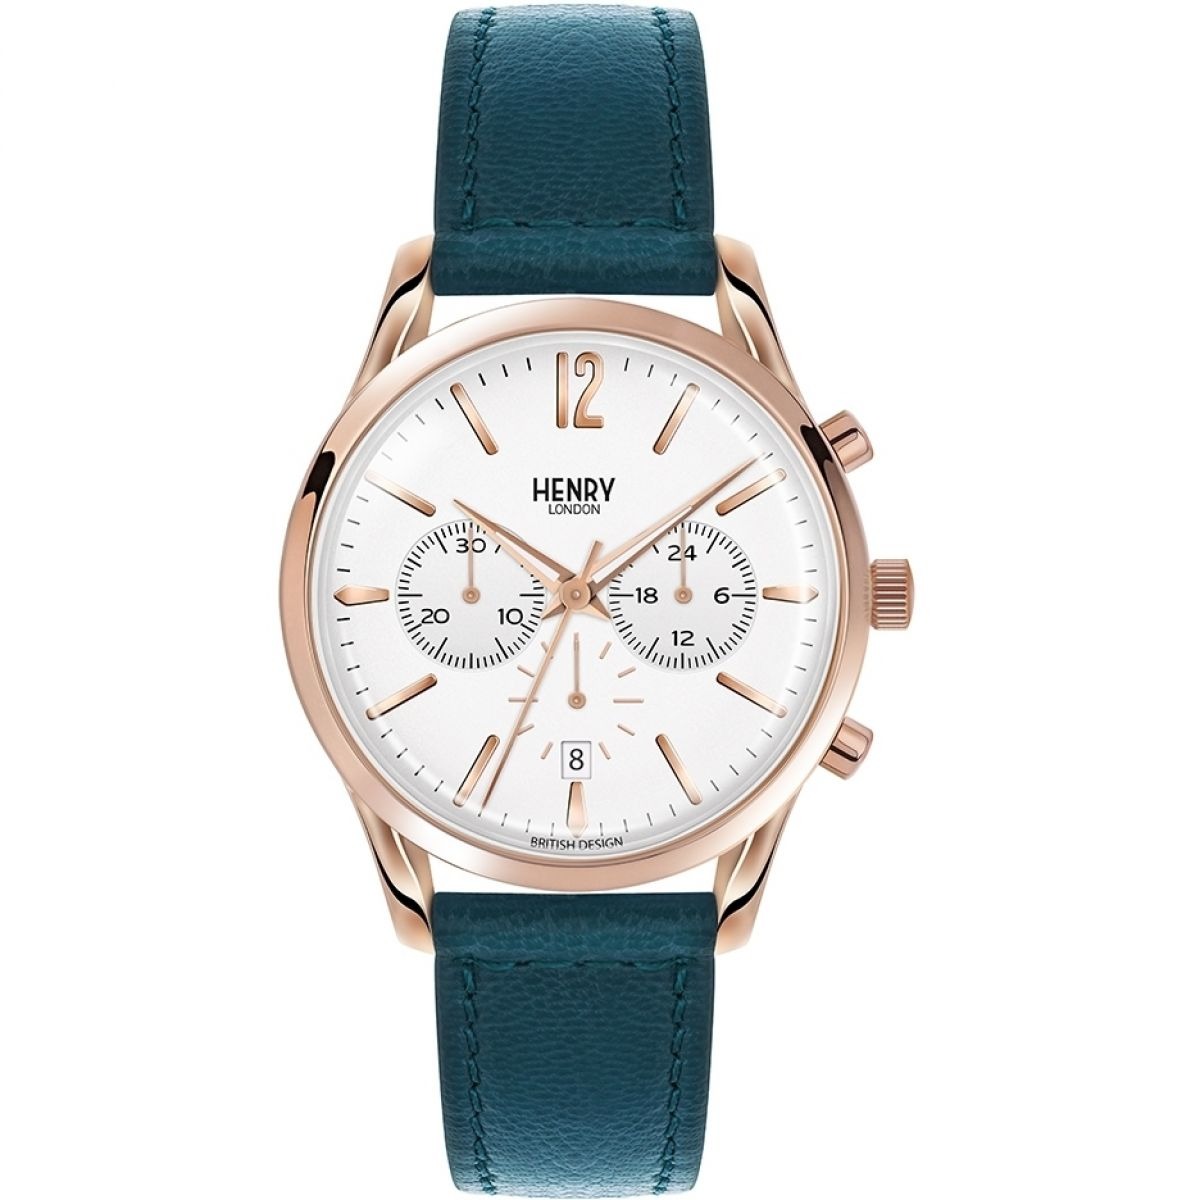 Gents White Chronograph Watch at Watch Shop GOOFASH